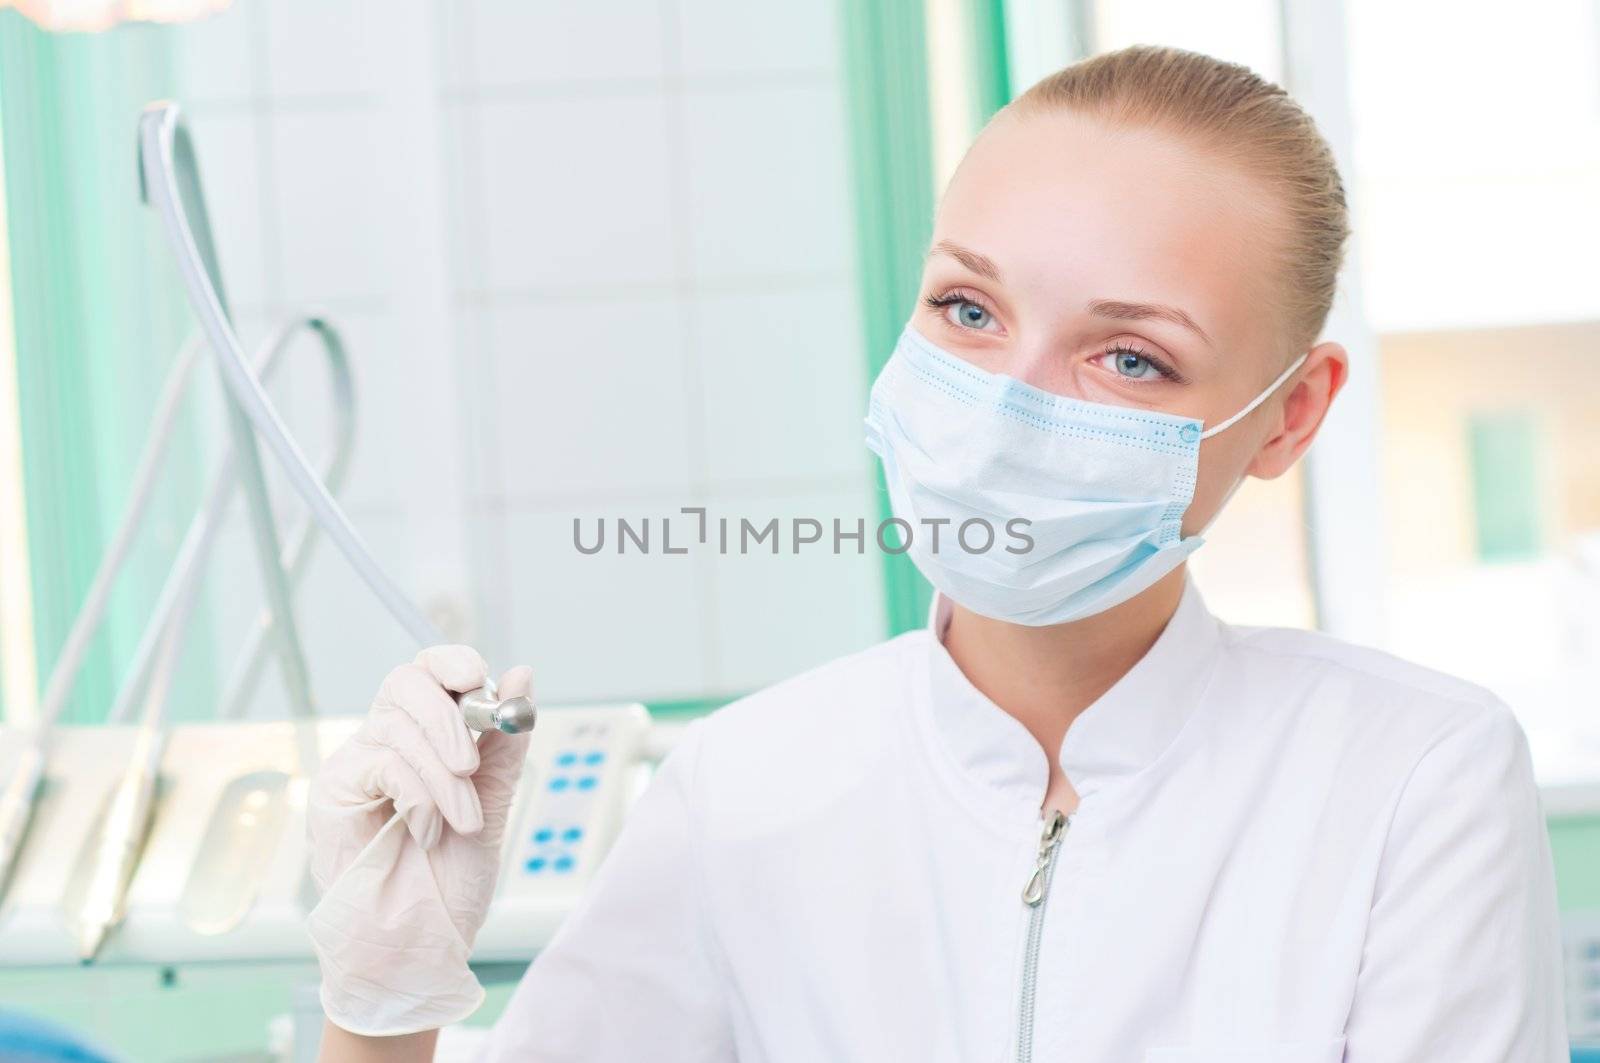 female dentists in protective mask holds a dental drill, the doctors at work